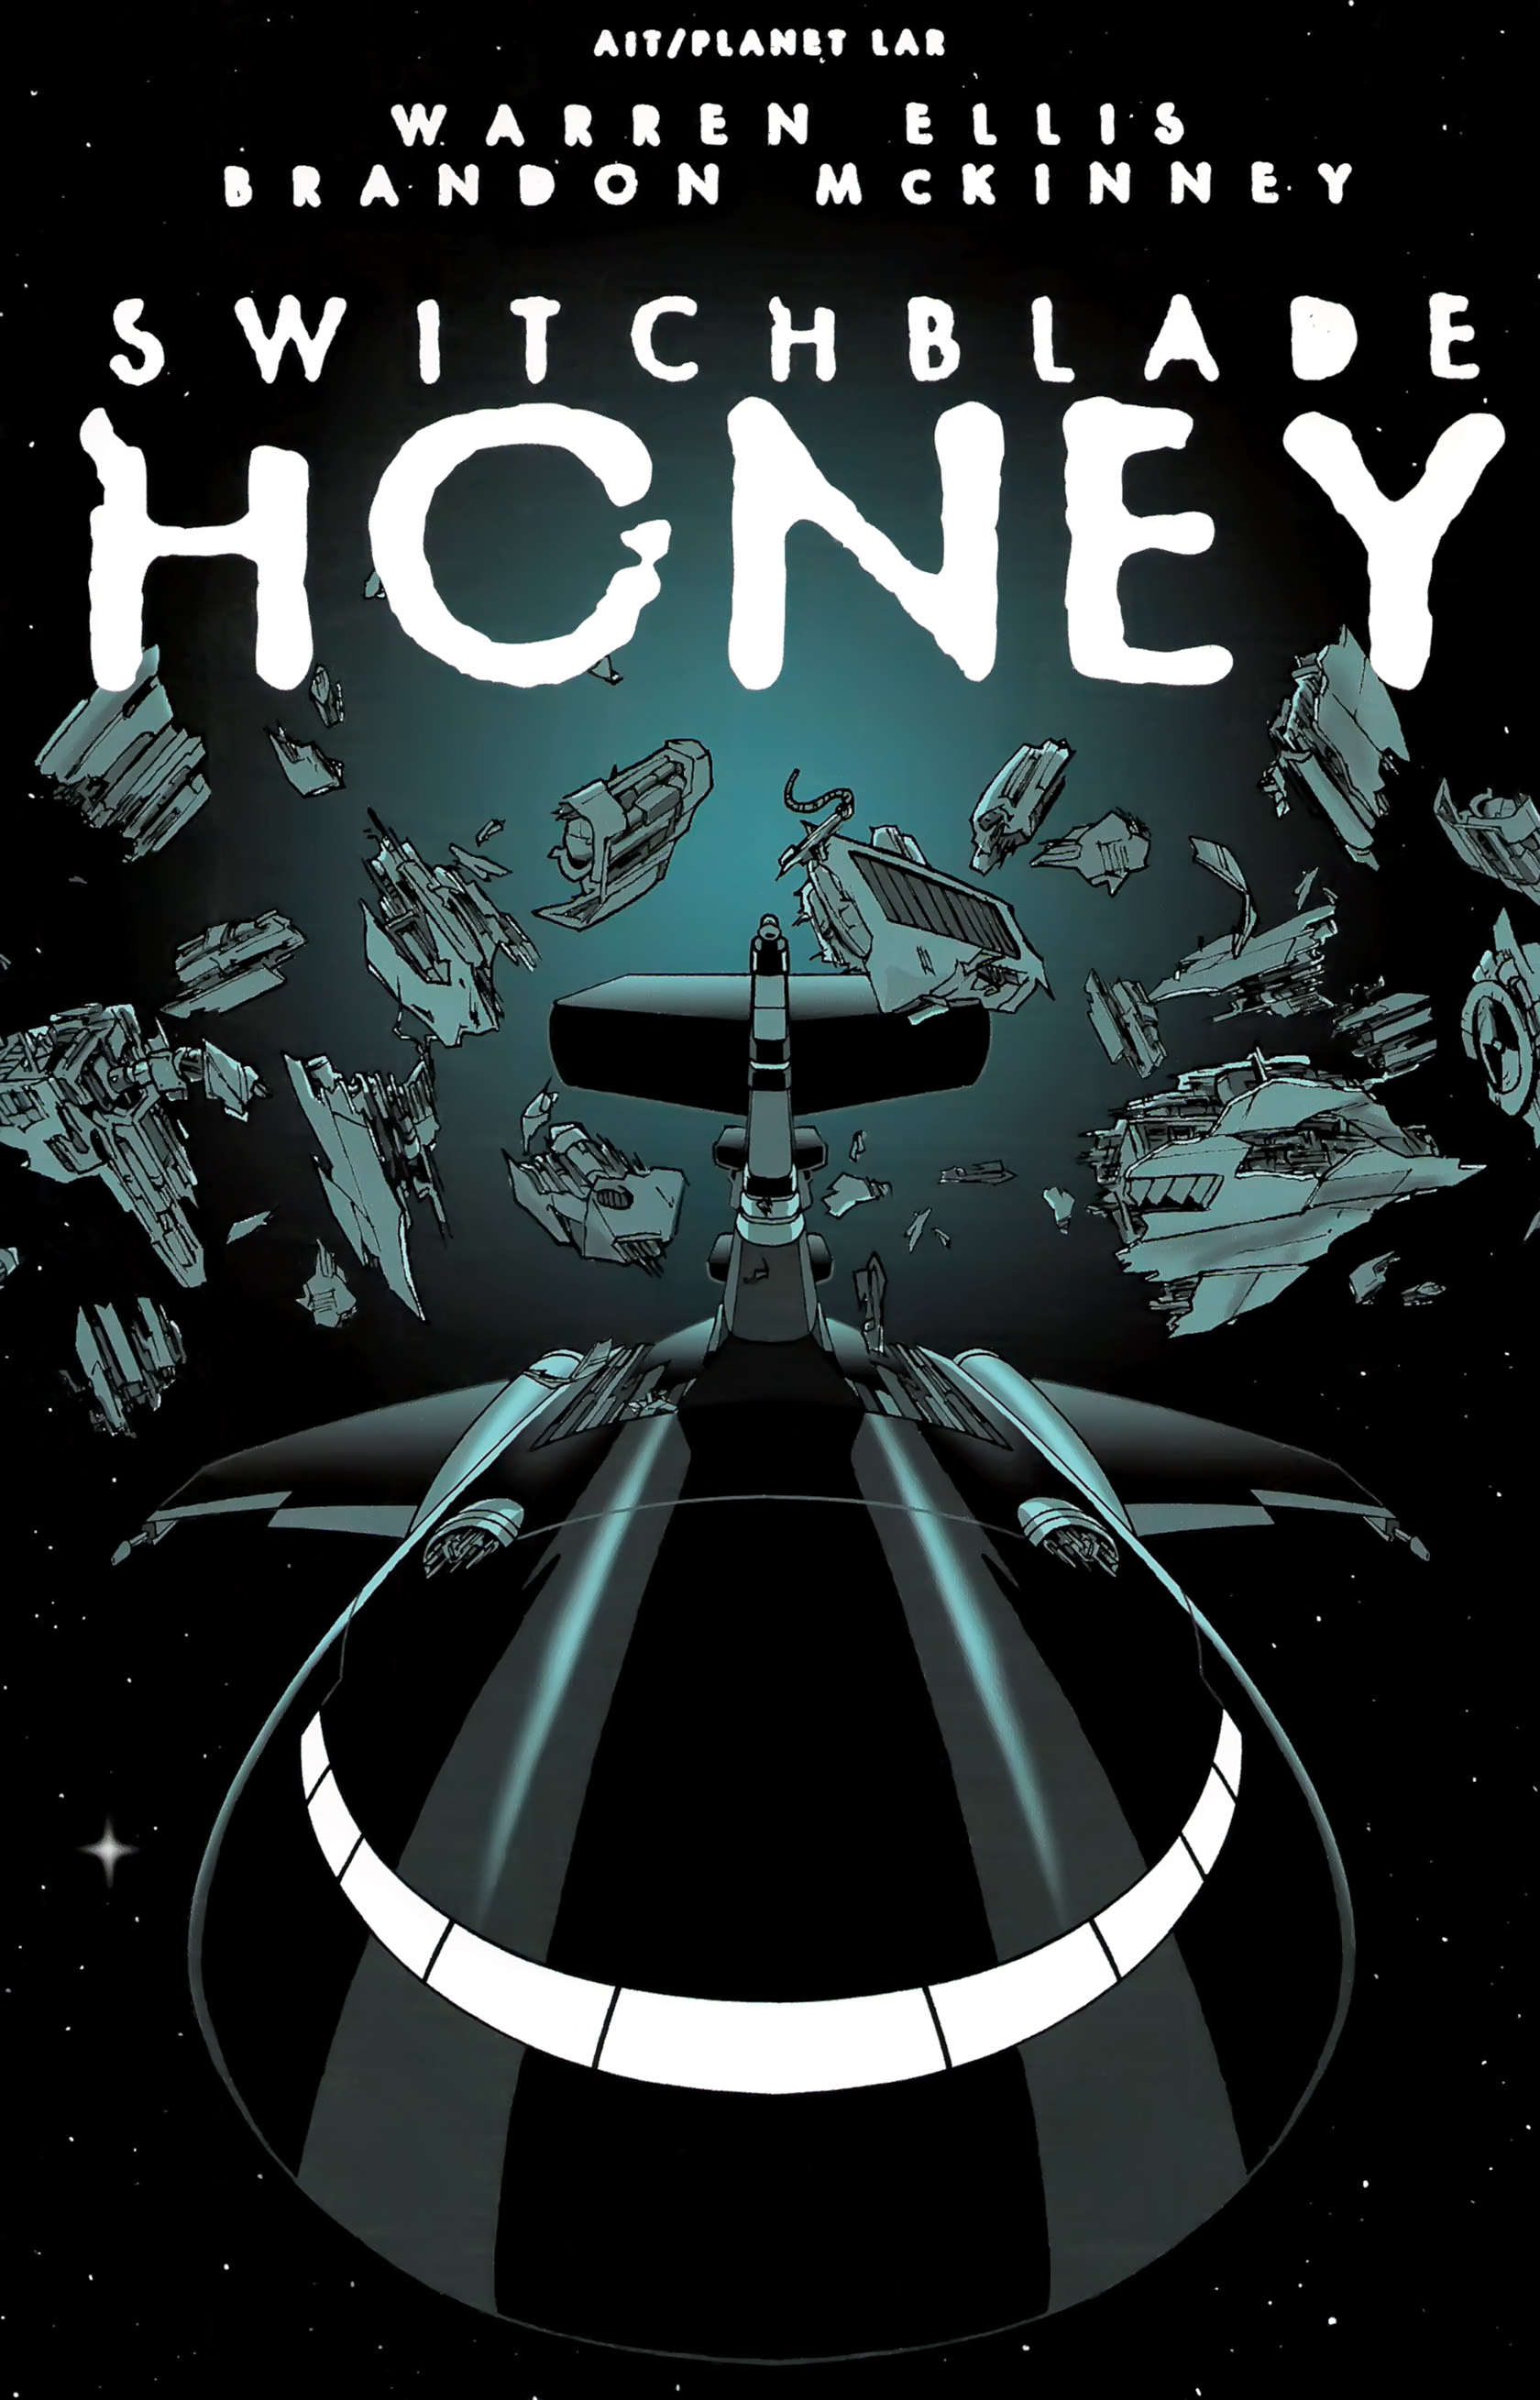 Read online Switchblade Honey comic -  Issue # TPB - 1